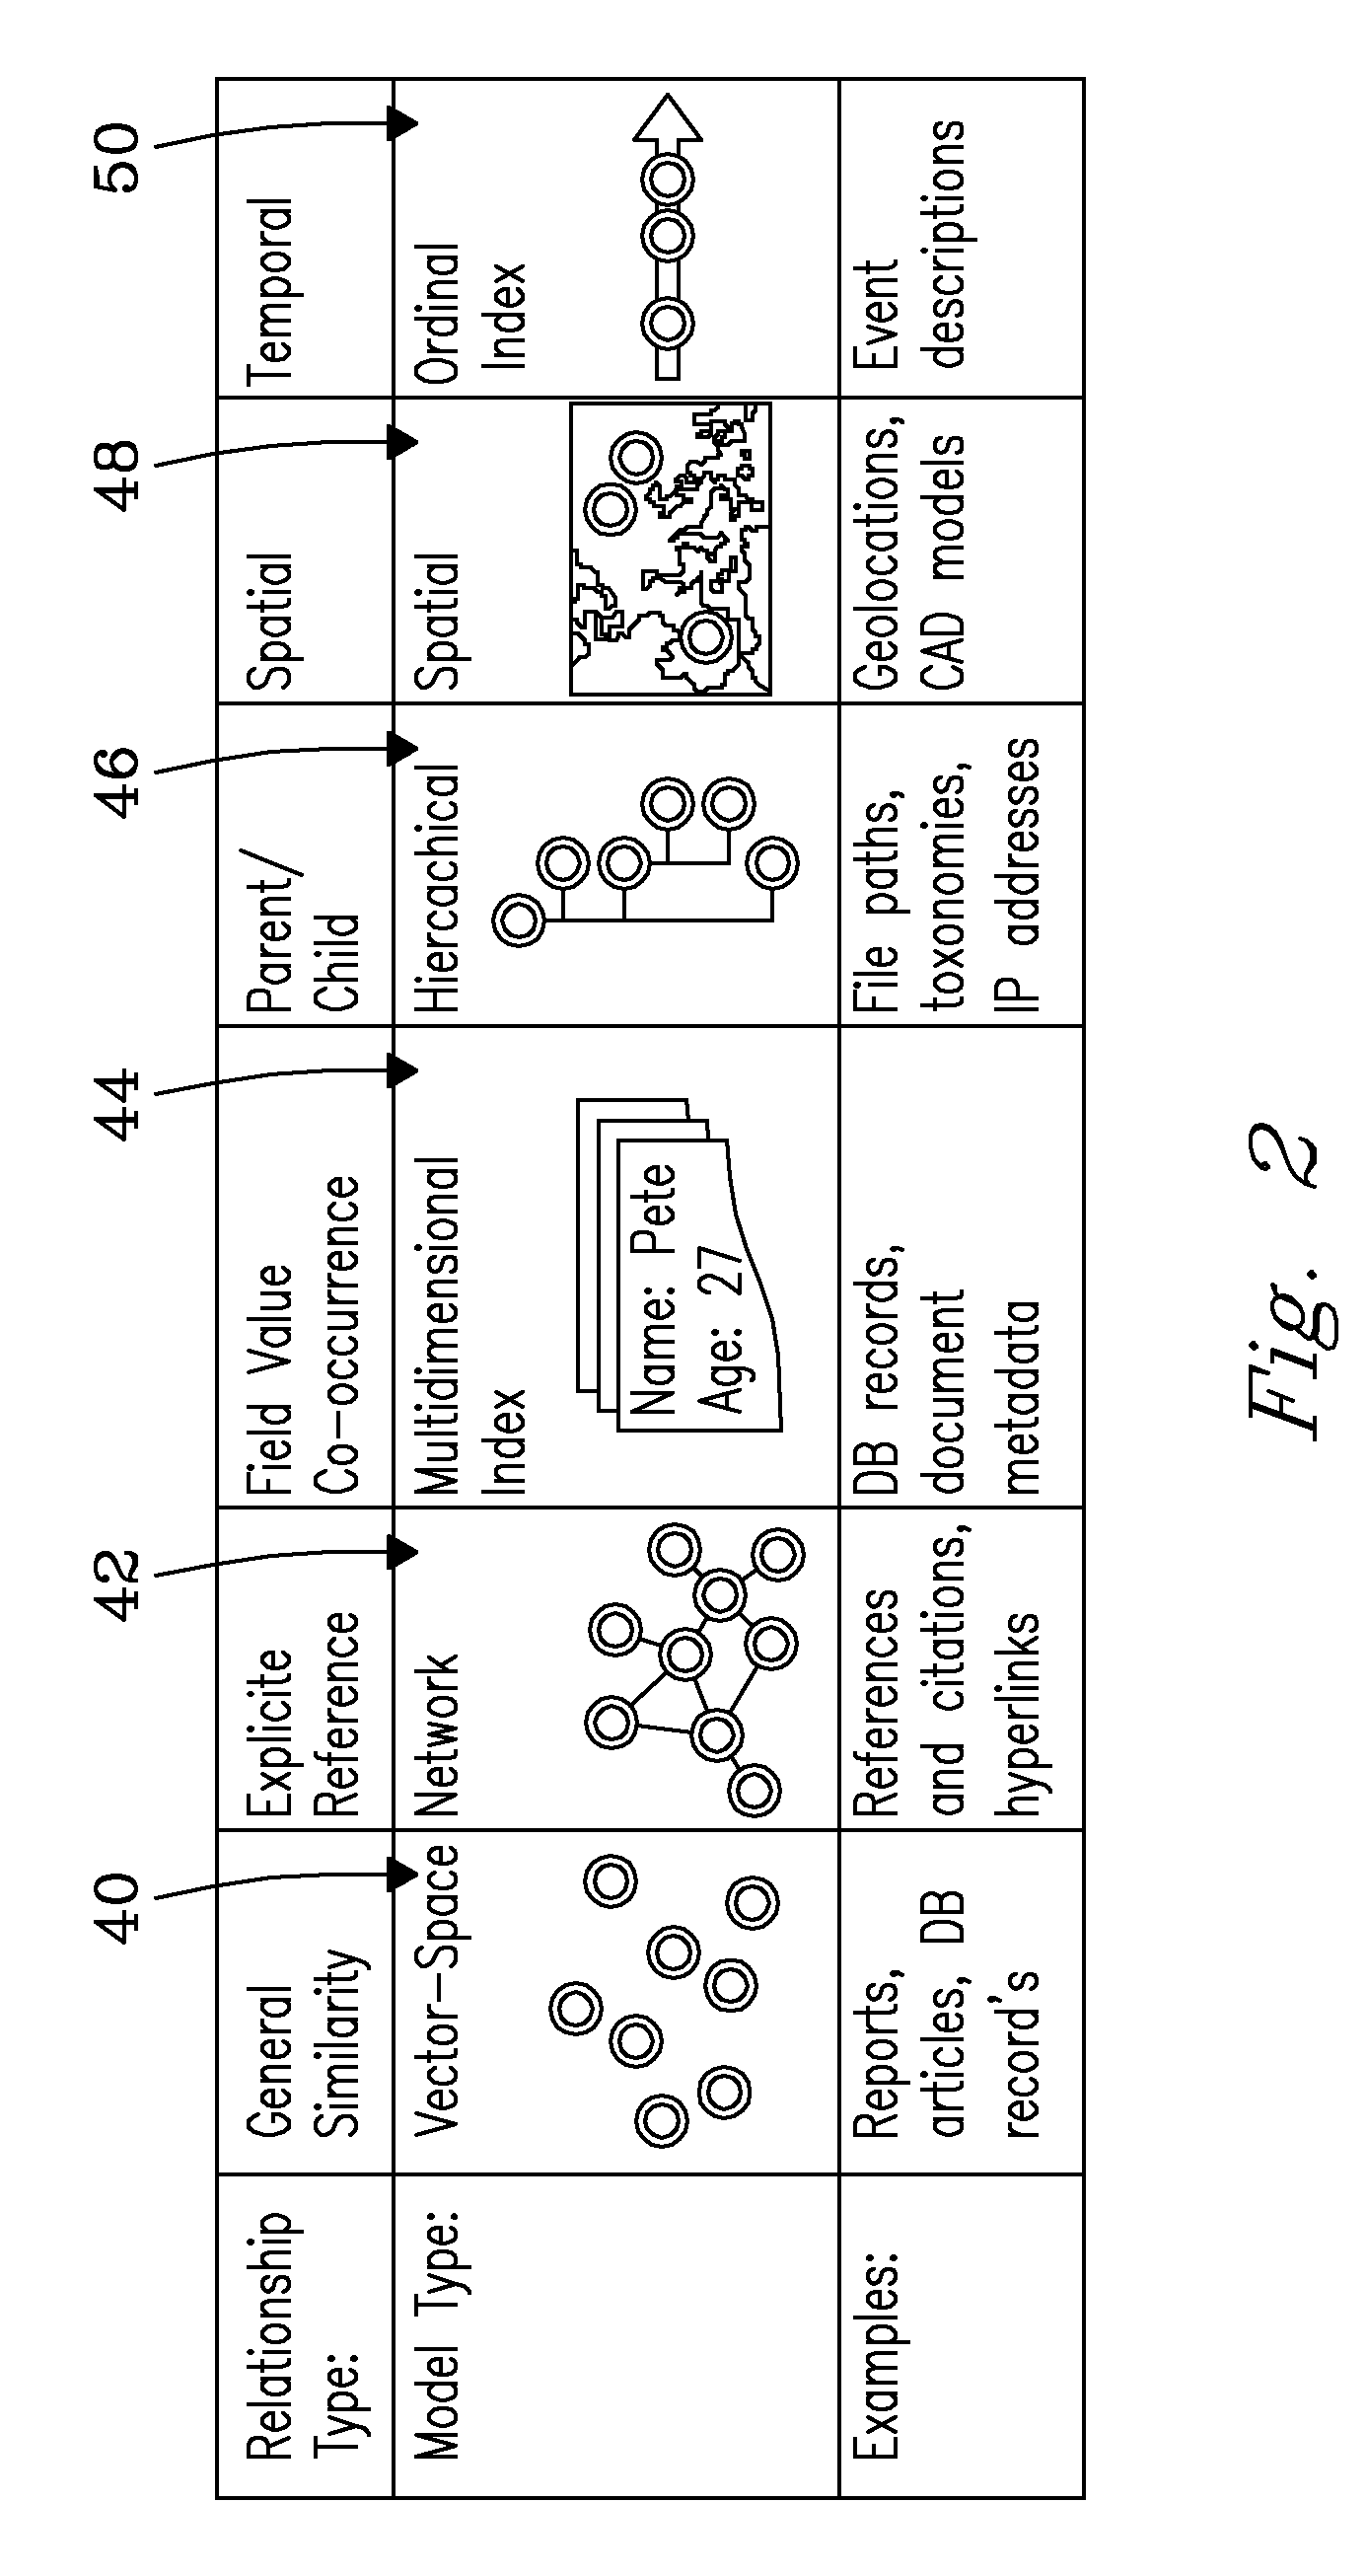 Multidimensional Structured Data Visualization Method and Apparatus, Text Visualization Method and Apparatus, Method and Apparatus for Visualizing and Graphically Navigating the World Wide Web, Method and Apparatus for Visualizing Hierarchies